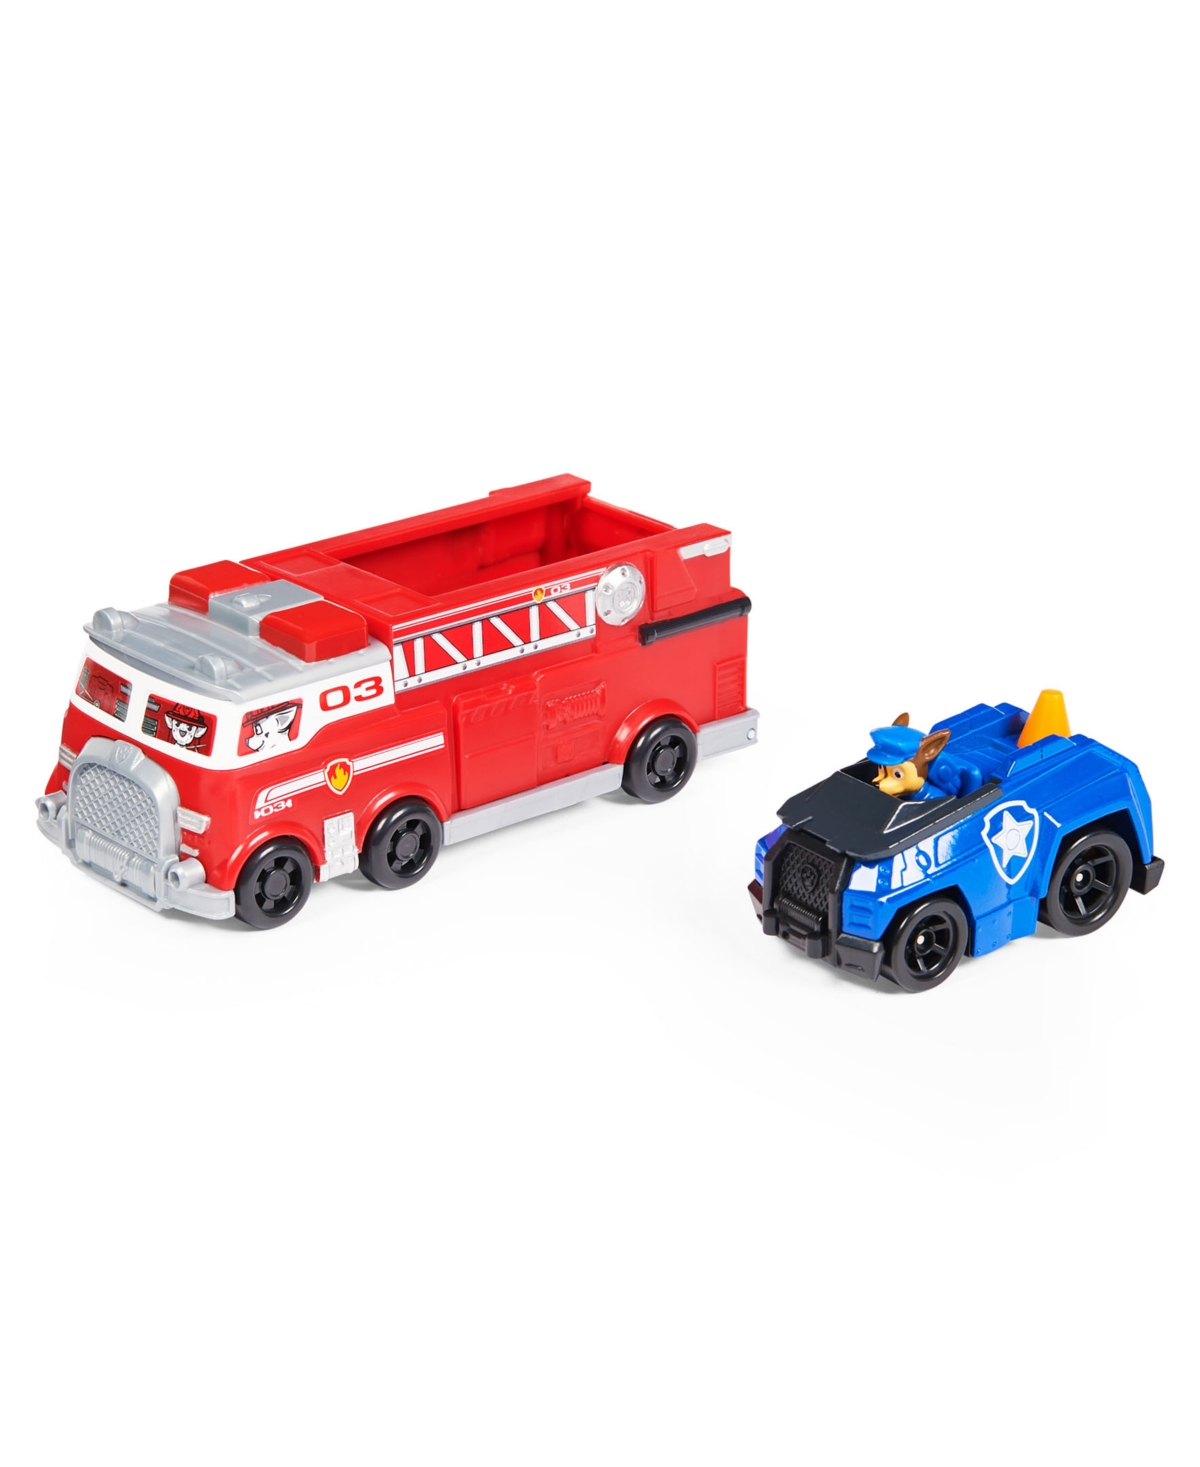 Paw Patrol True Metal Firetruck Die-cast Team Vehicle With 1:55 Scale Chase In Multi-color